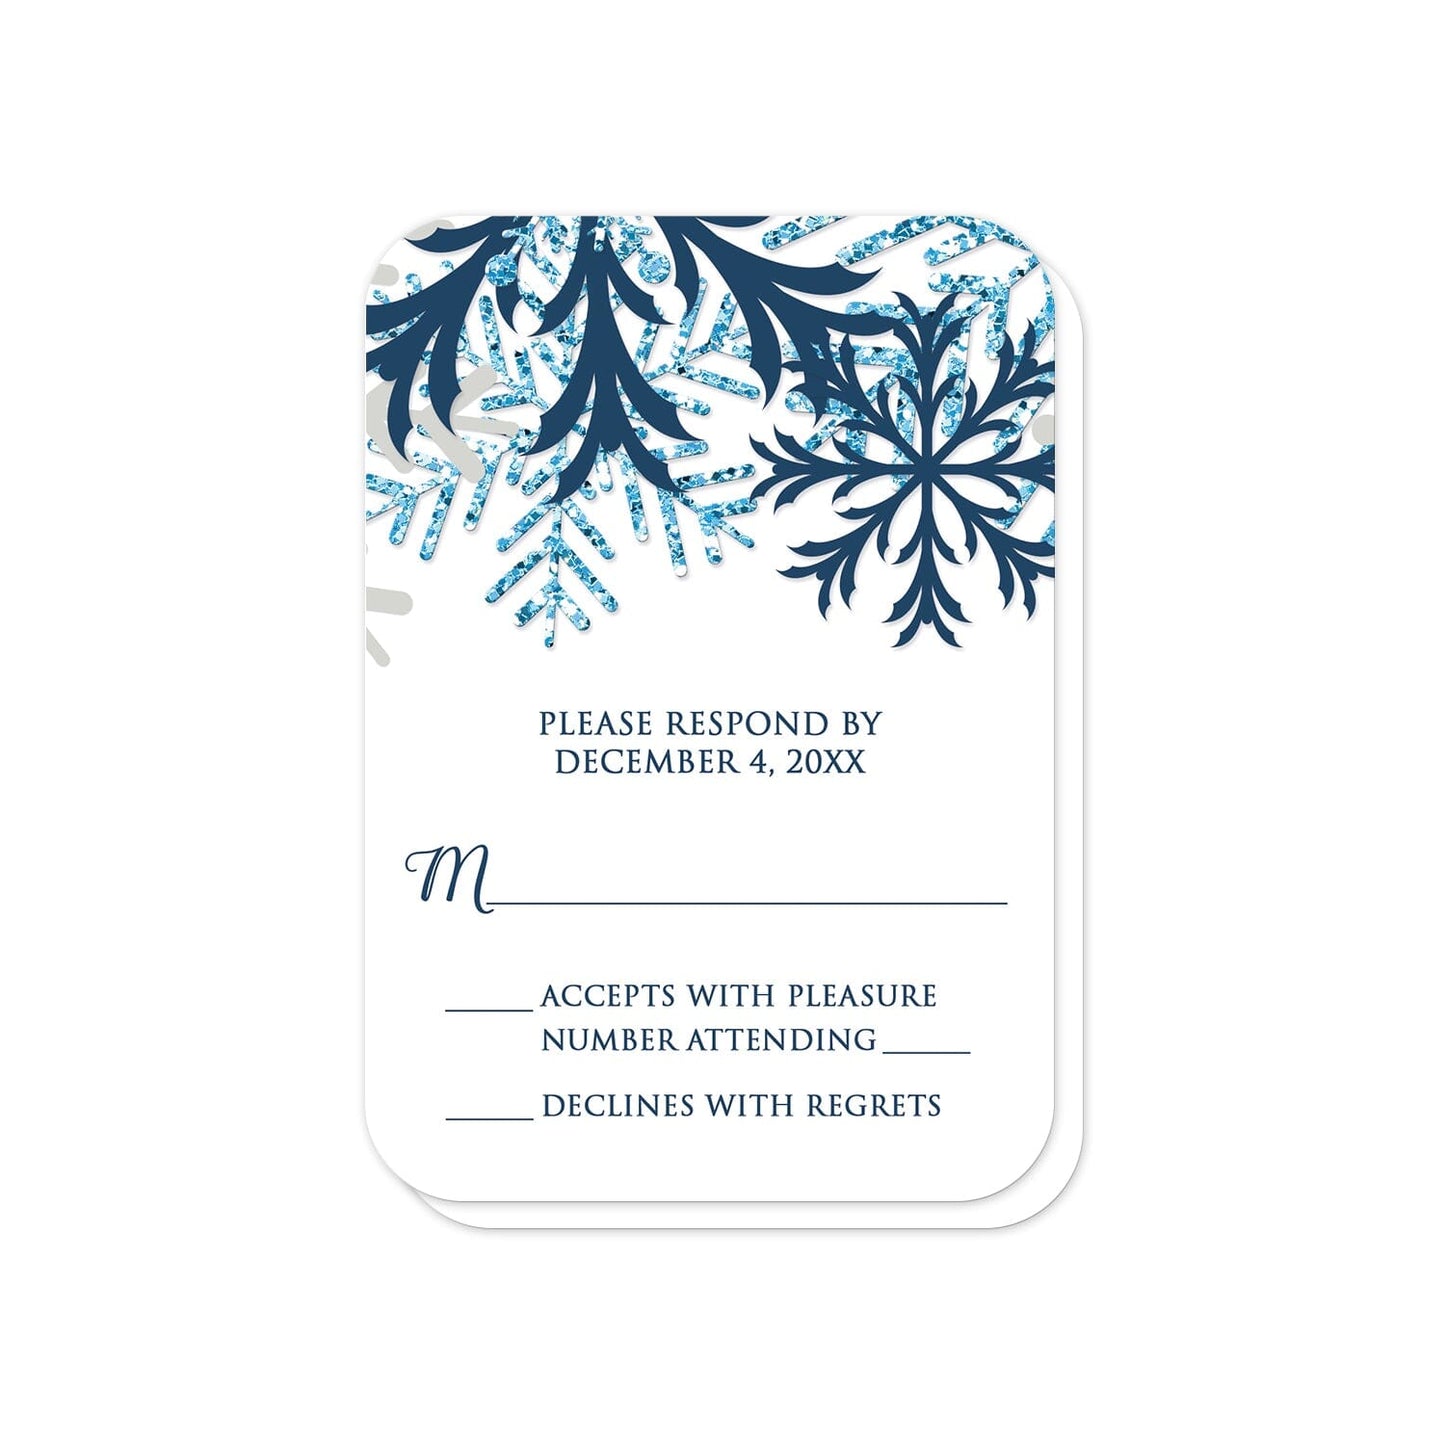 Rustic Snowflake Denim Winter RSVP Cards (with rounded corners) at Artistically Invited.